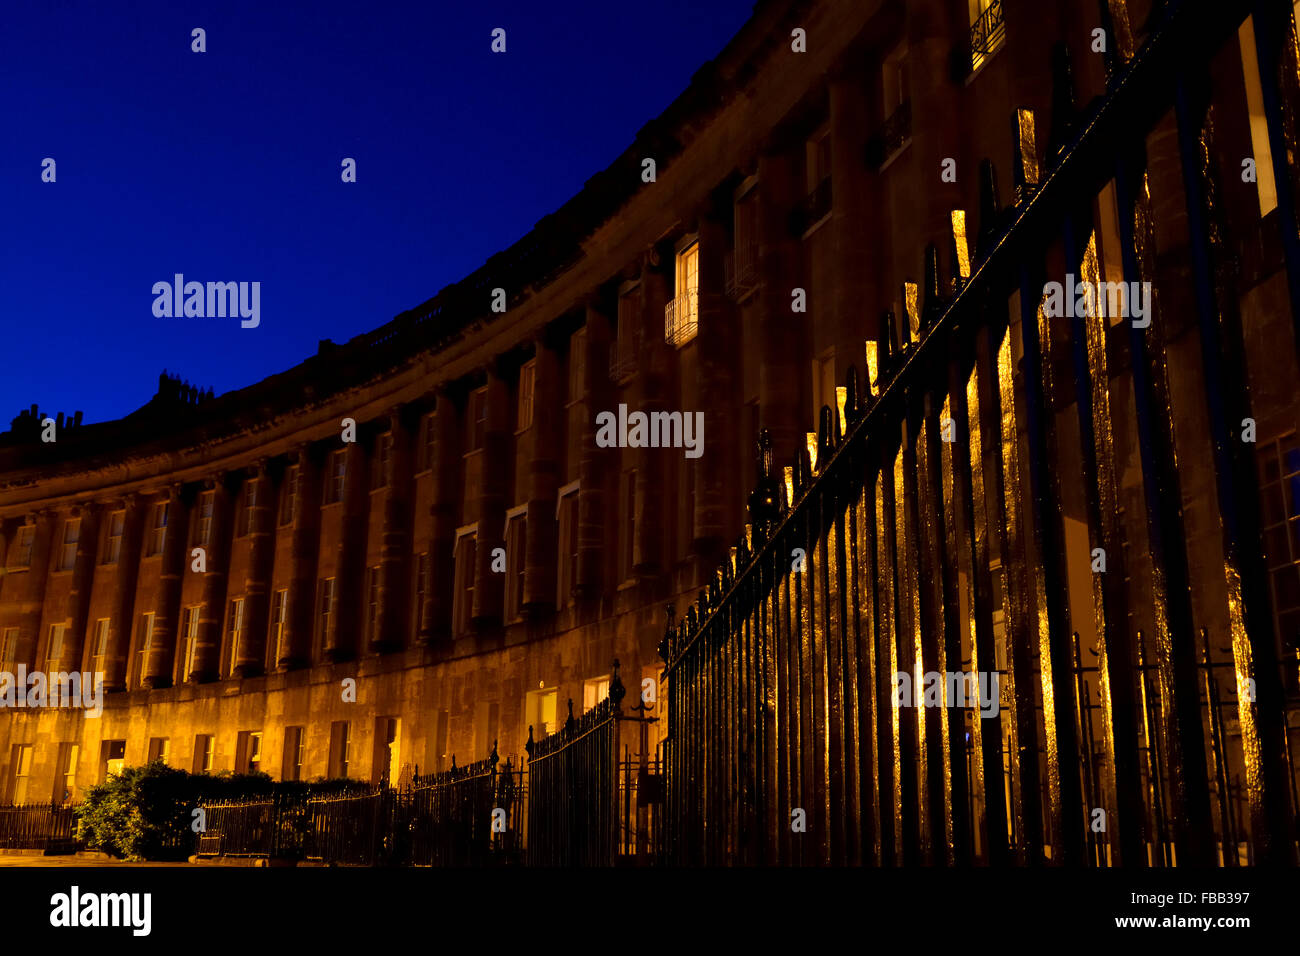 The Royal Crescent in Bath, at night, from a low viewpoint. Section of the historic and beautiful building showing iron railing Stock Photo